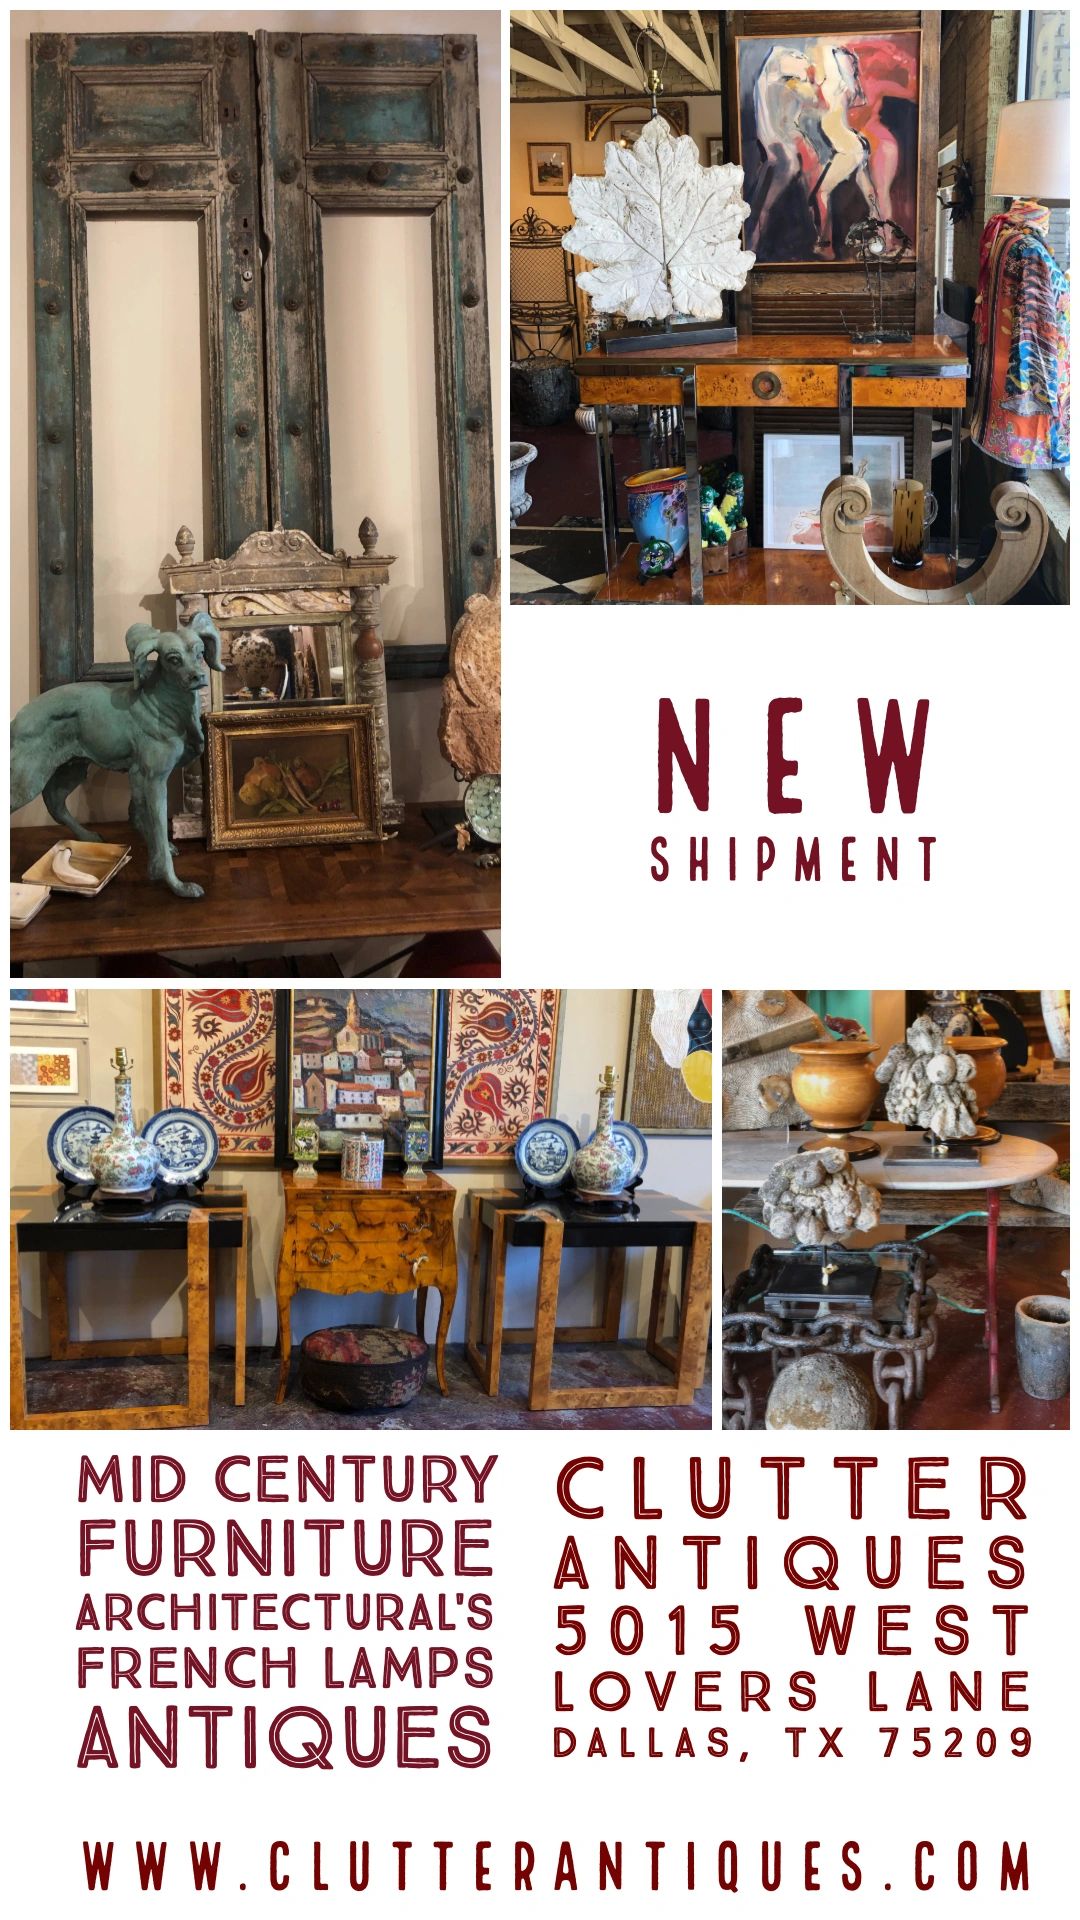 Clutter Antiques Has A New Shipment Of Antiques And More